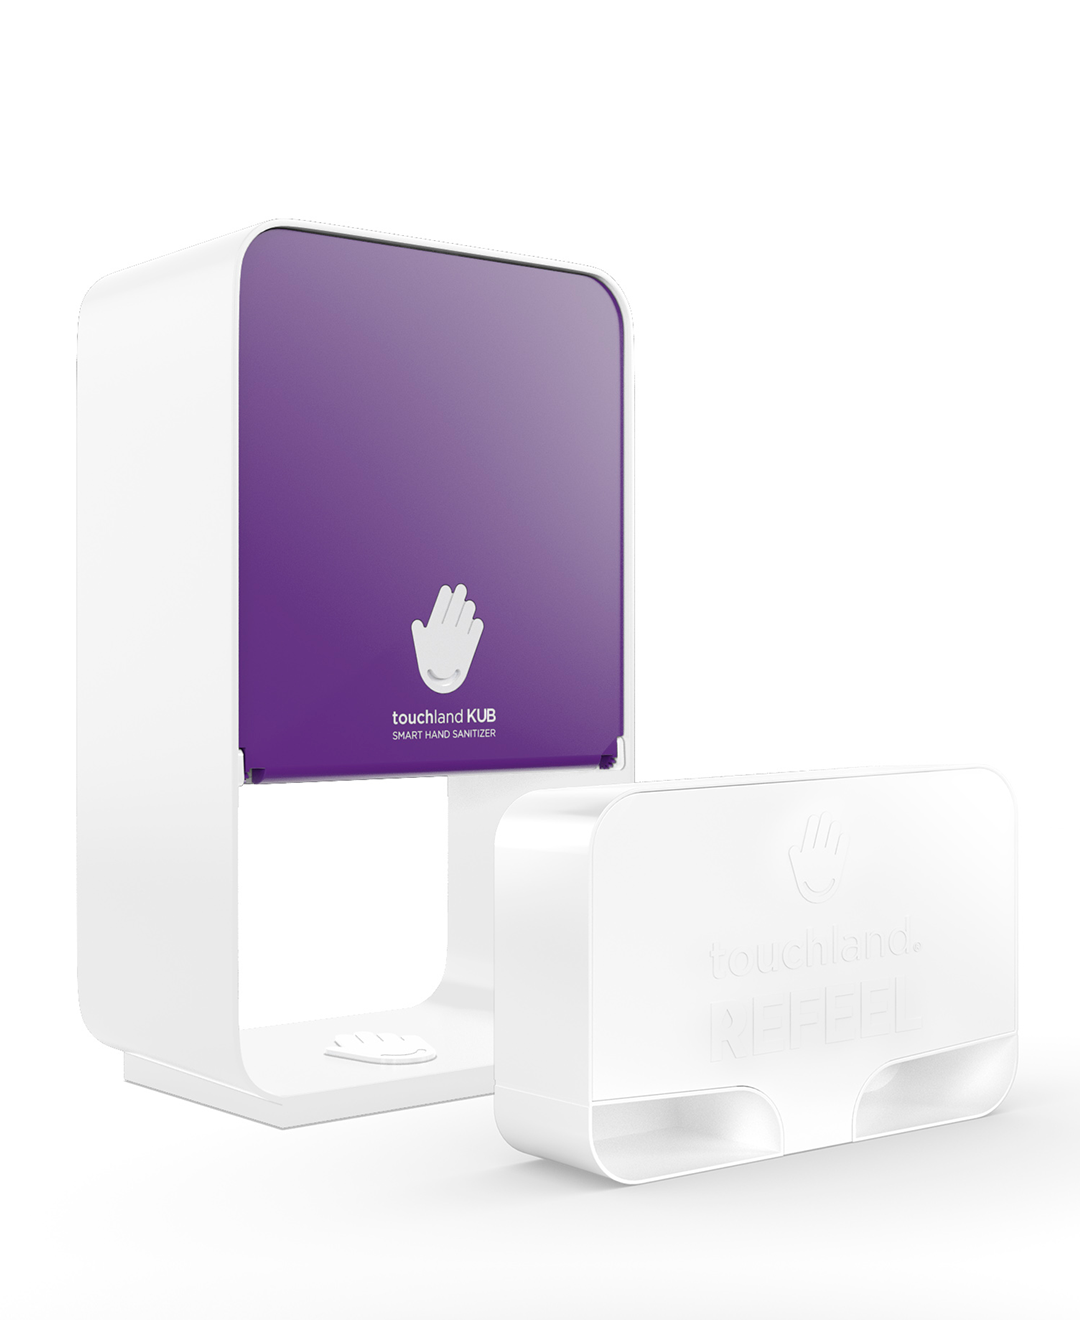 Purple kub dispenser at 3/4 angle with refeel packet on white background